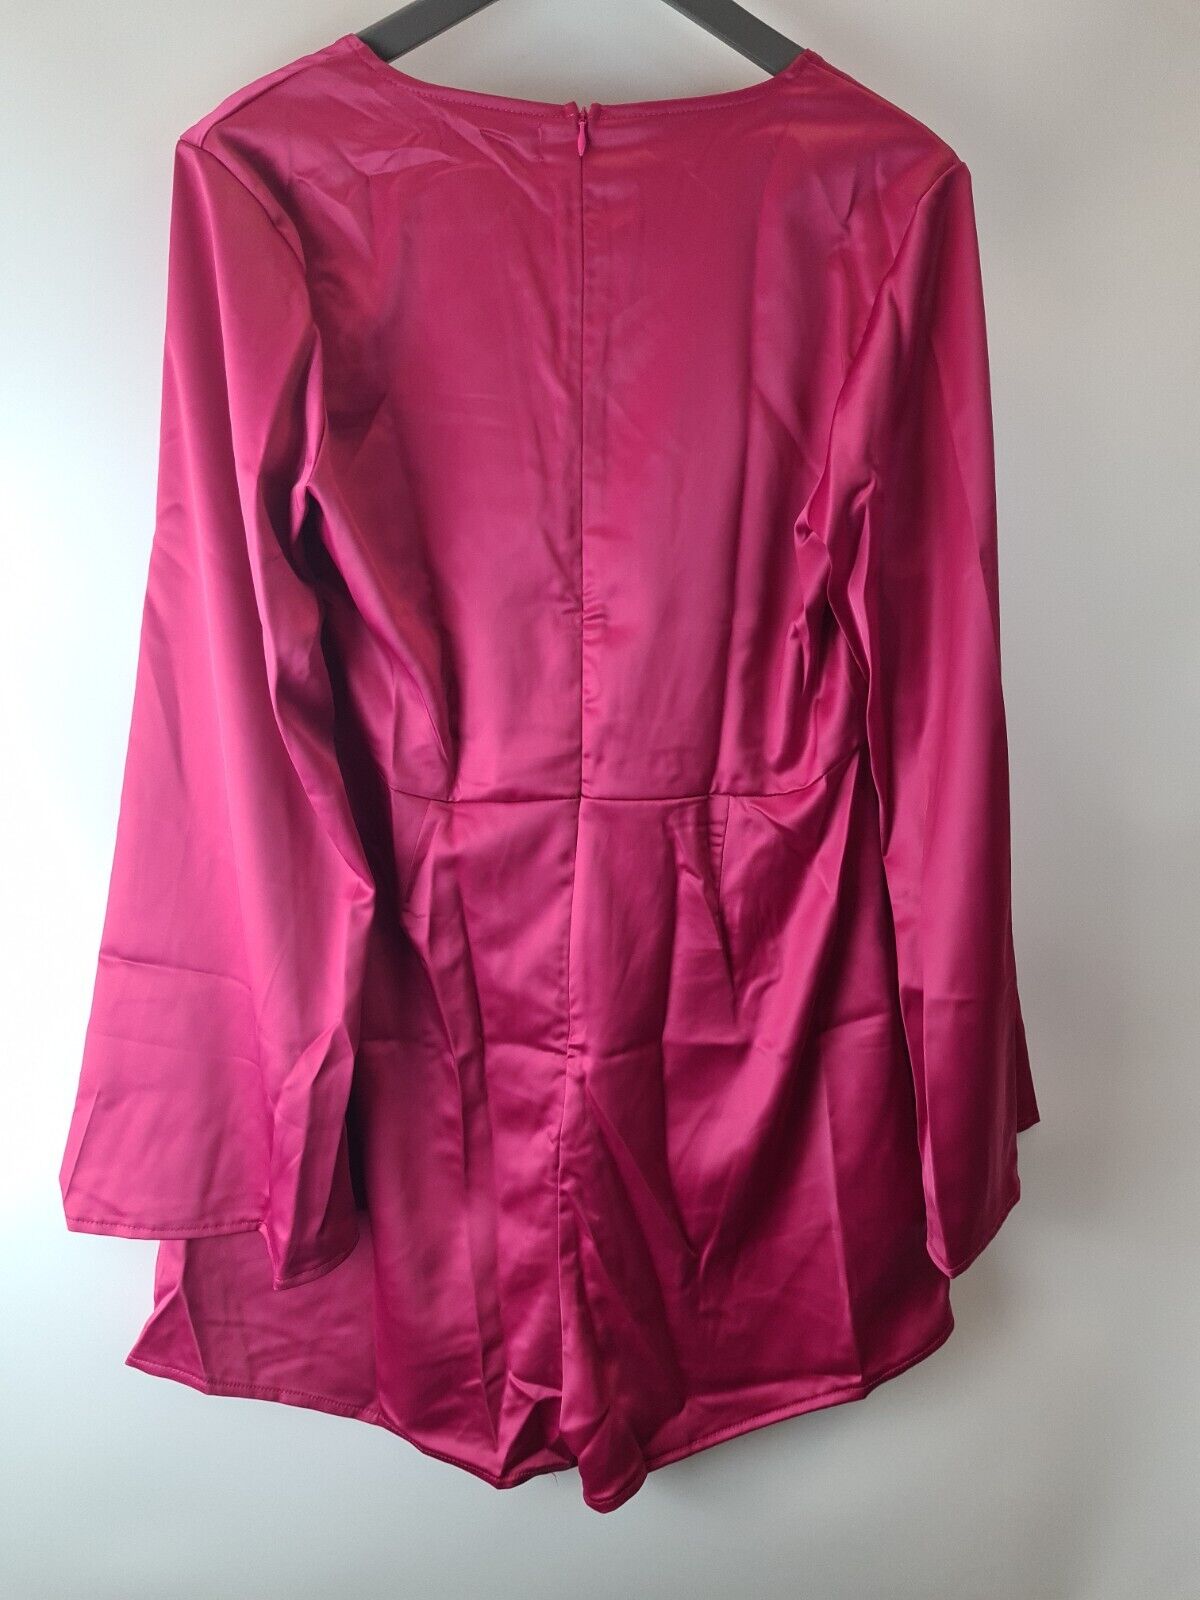 Missguided Satin Tie Front Flare Sleeves Hot Pink Playsuit Size 8 **** V140